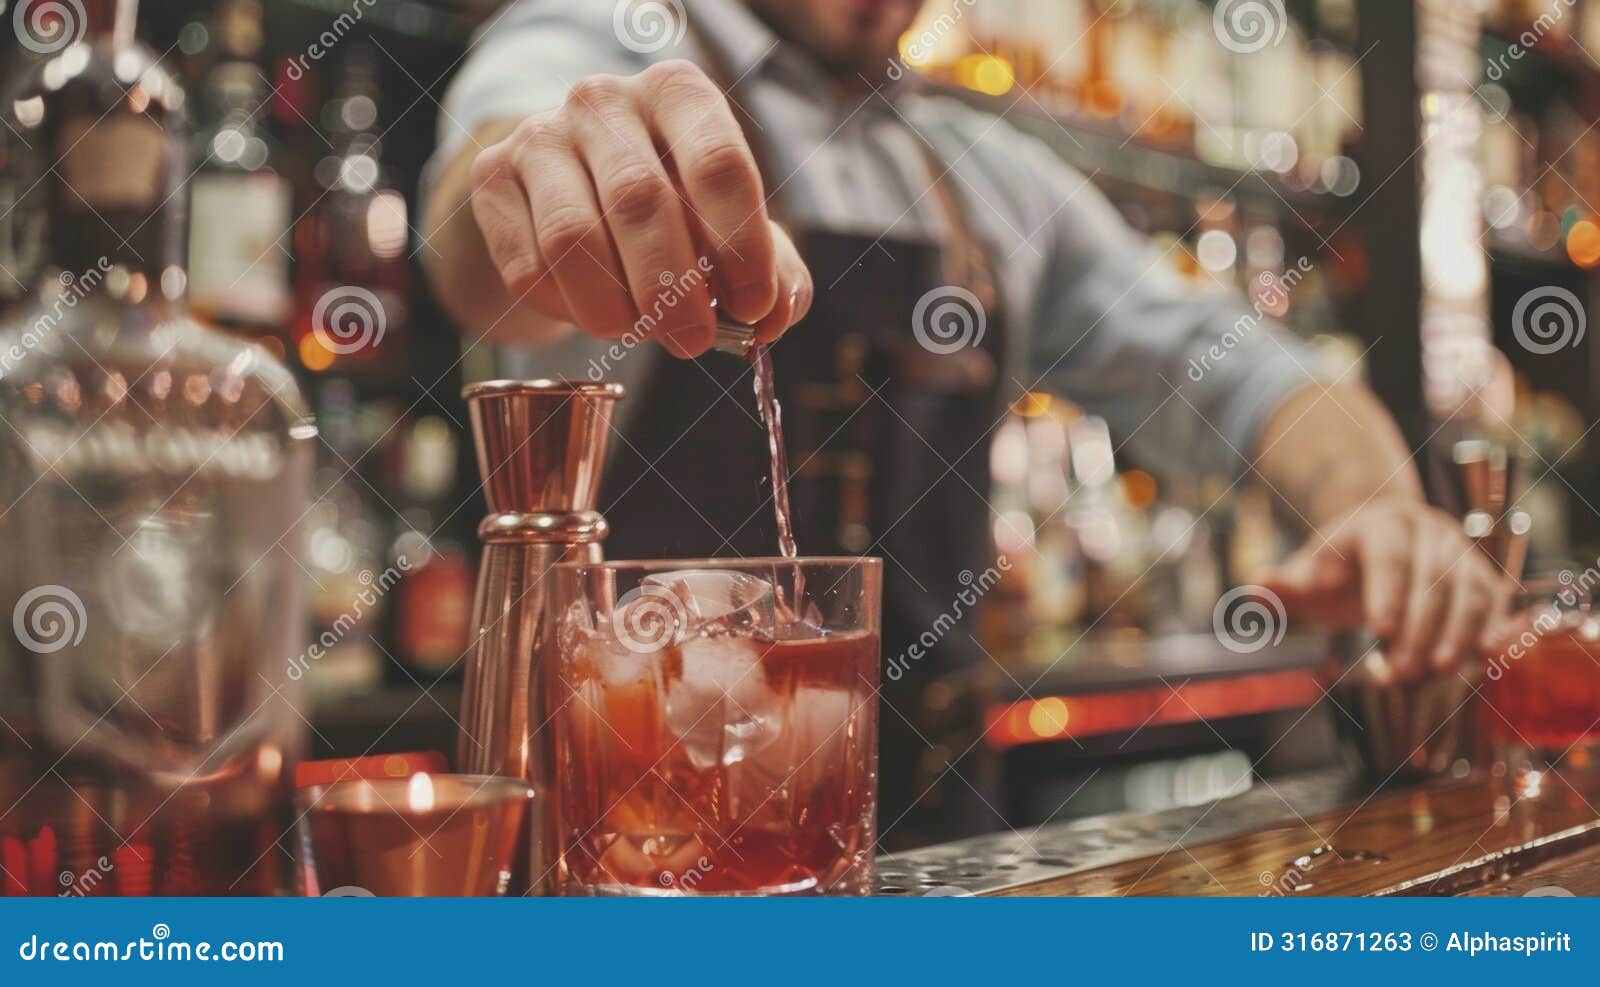 close-up of bartender pouring a drink into a glass with ice at a dimly lit bar